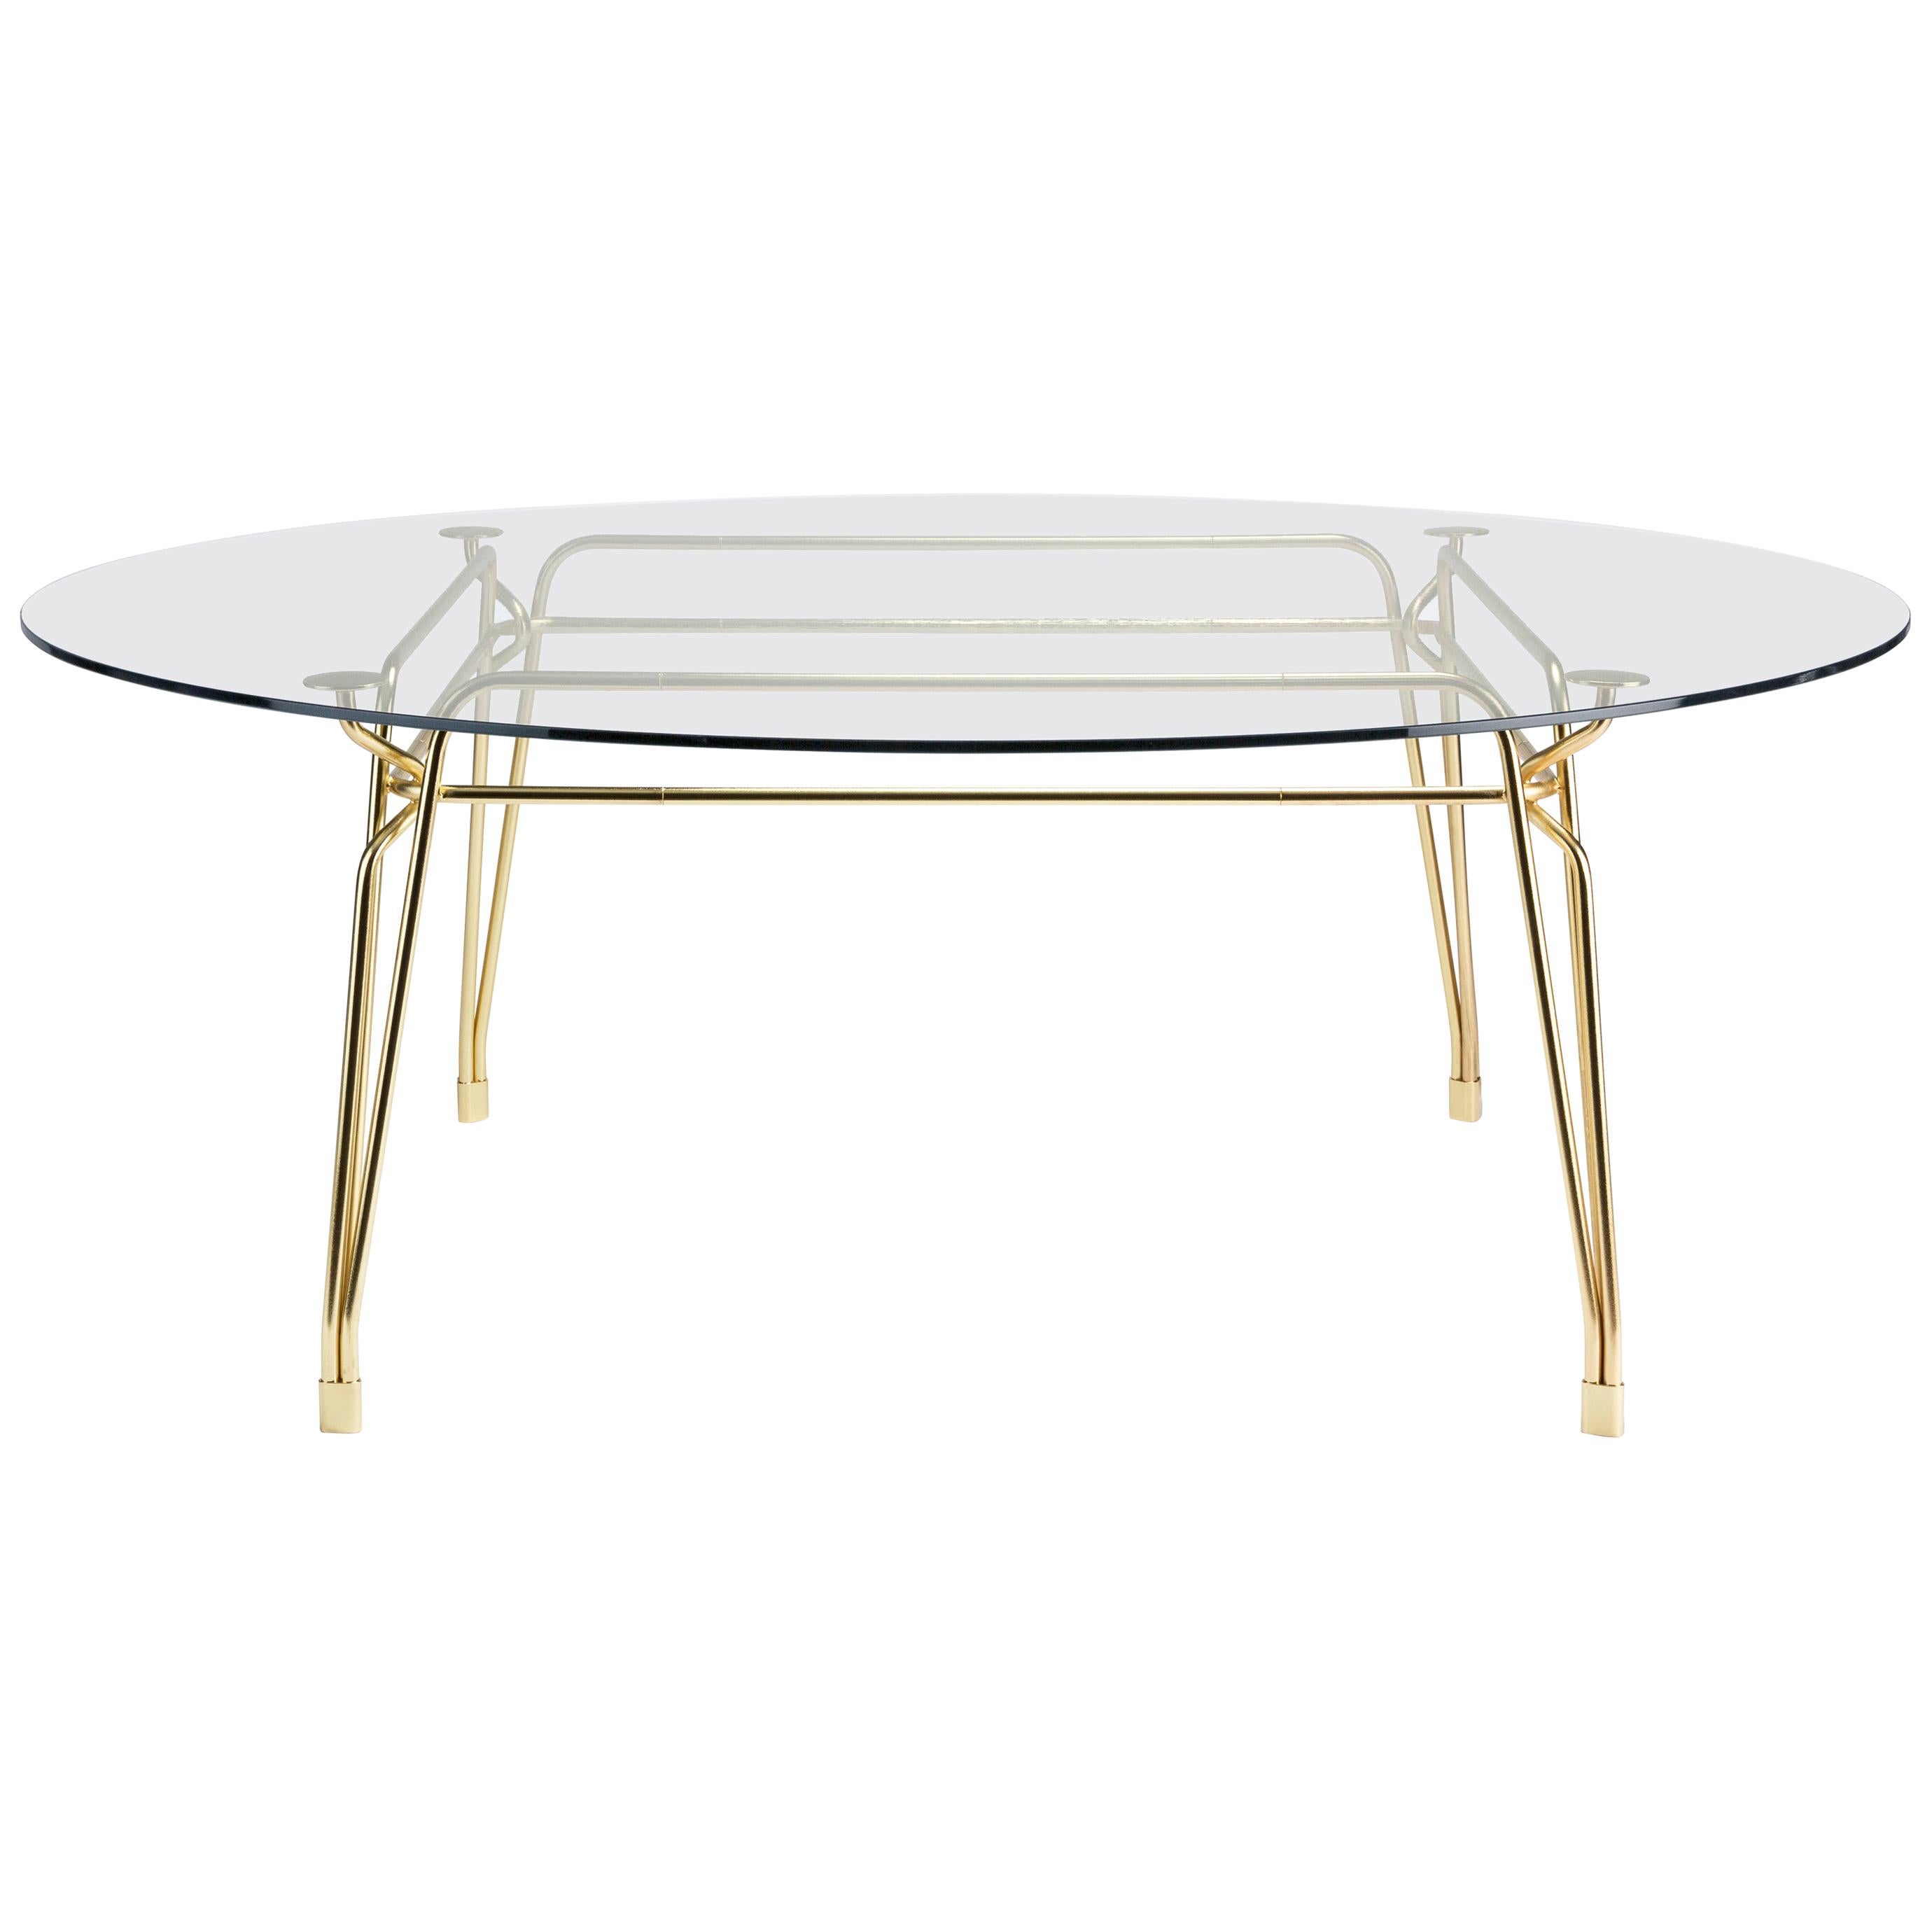 Botany Round Dining Table in Glass Top with Polished Brass Legs